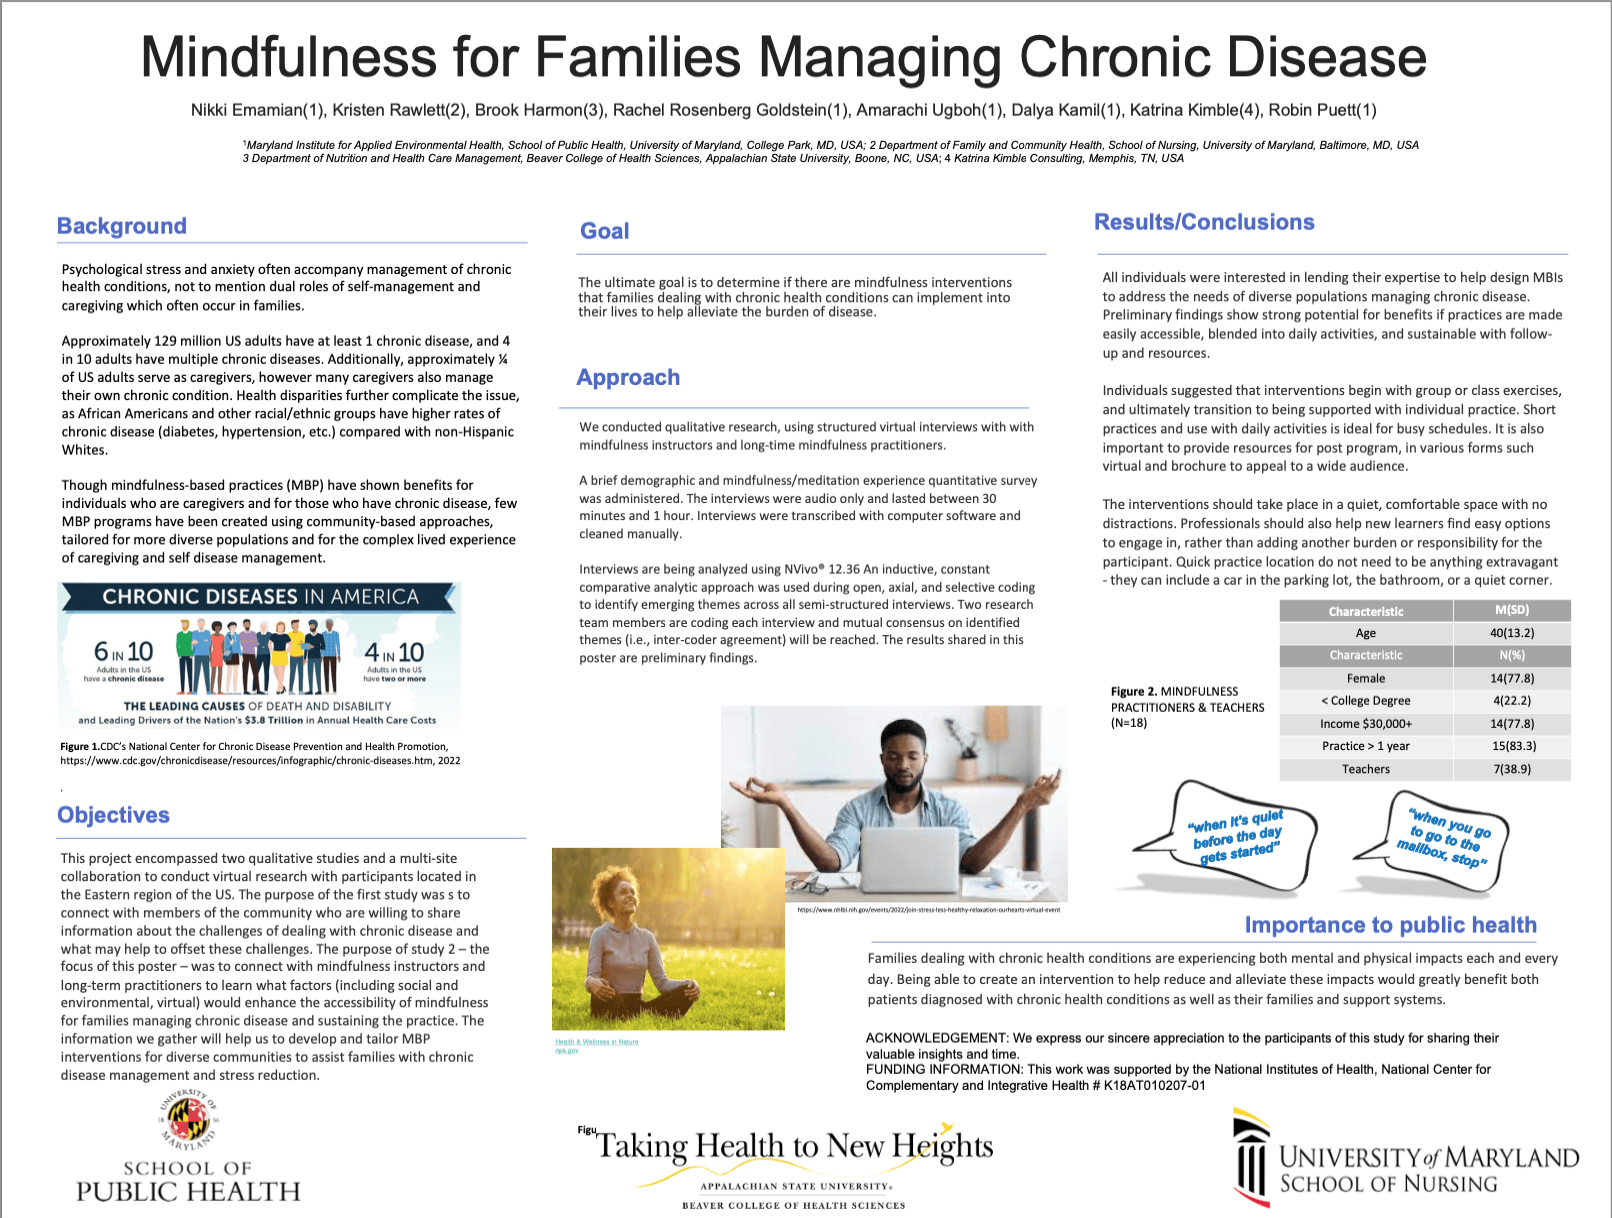 Mindfulness for families managing chronic disease